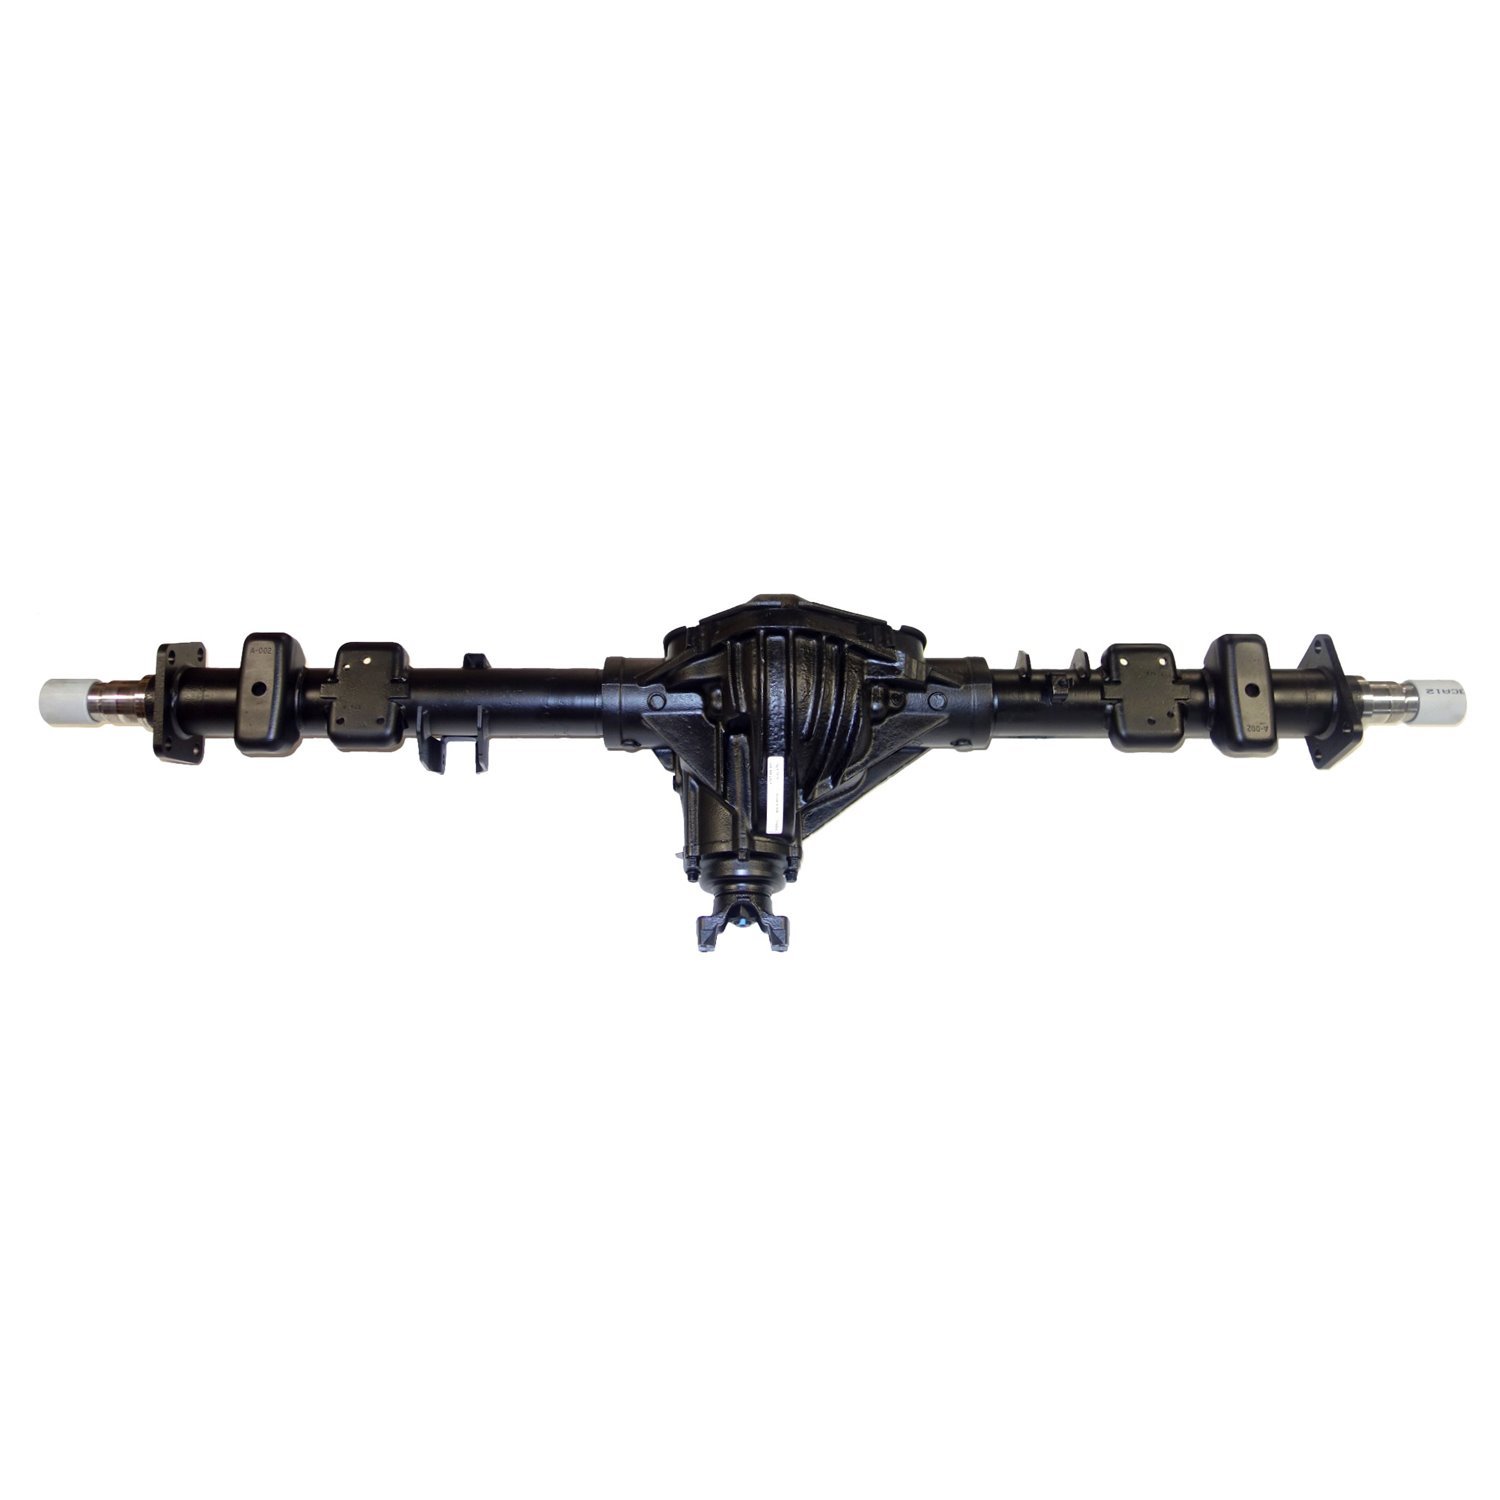 Remanufactured Axle Assy for GM 14 Bolt Truck 90-00 GM 2500 & 3500 Pickup 3.73 , 2wd, SRW